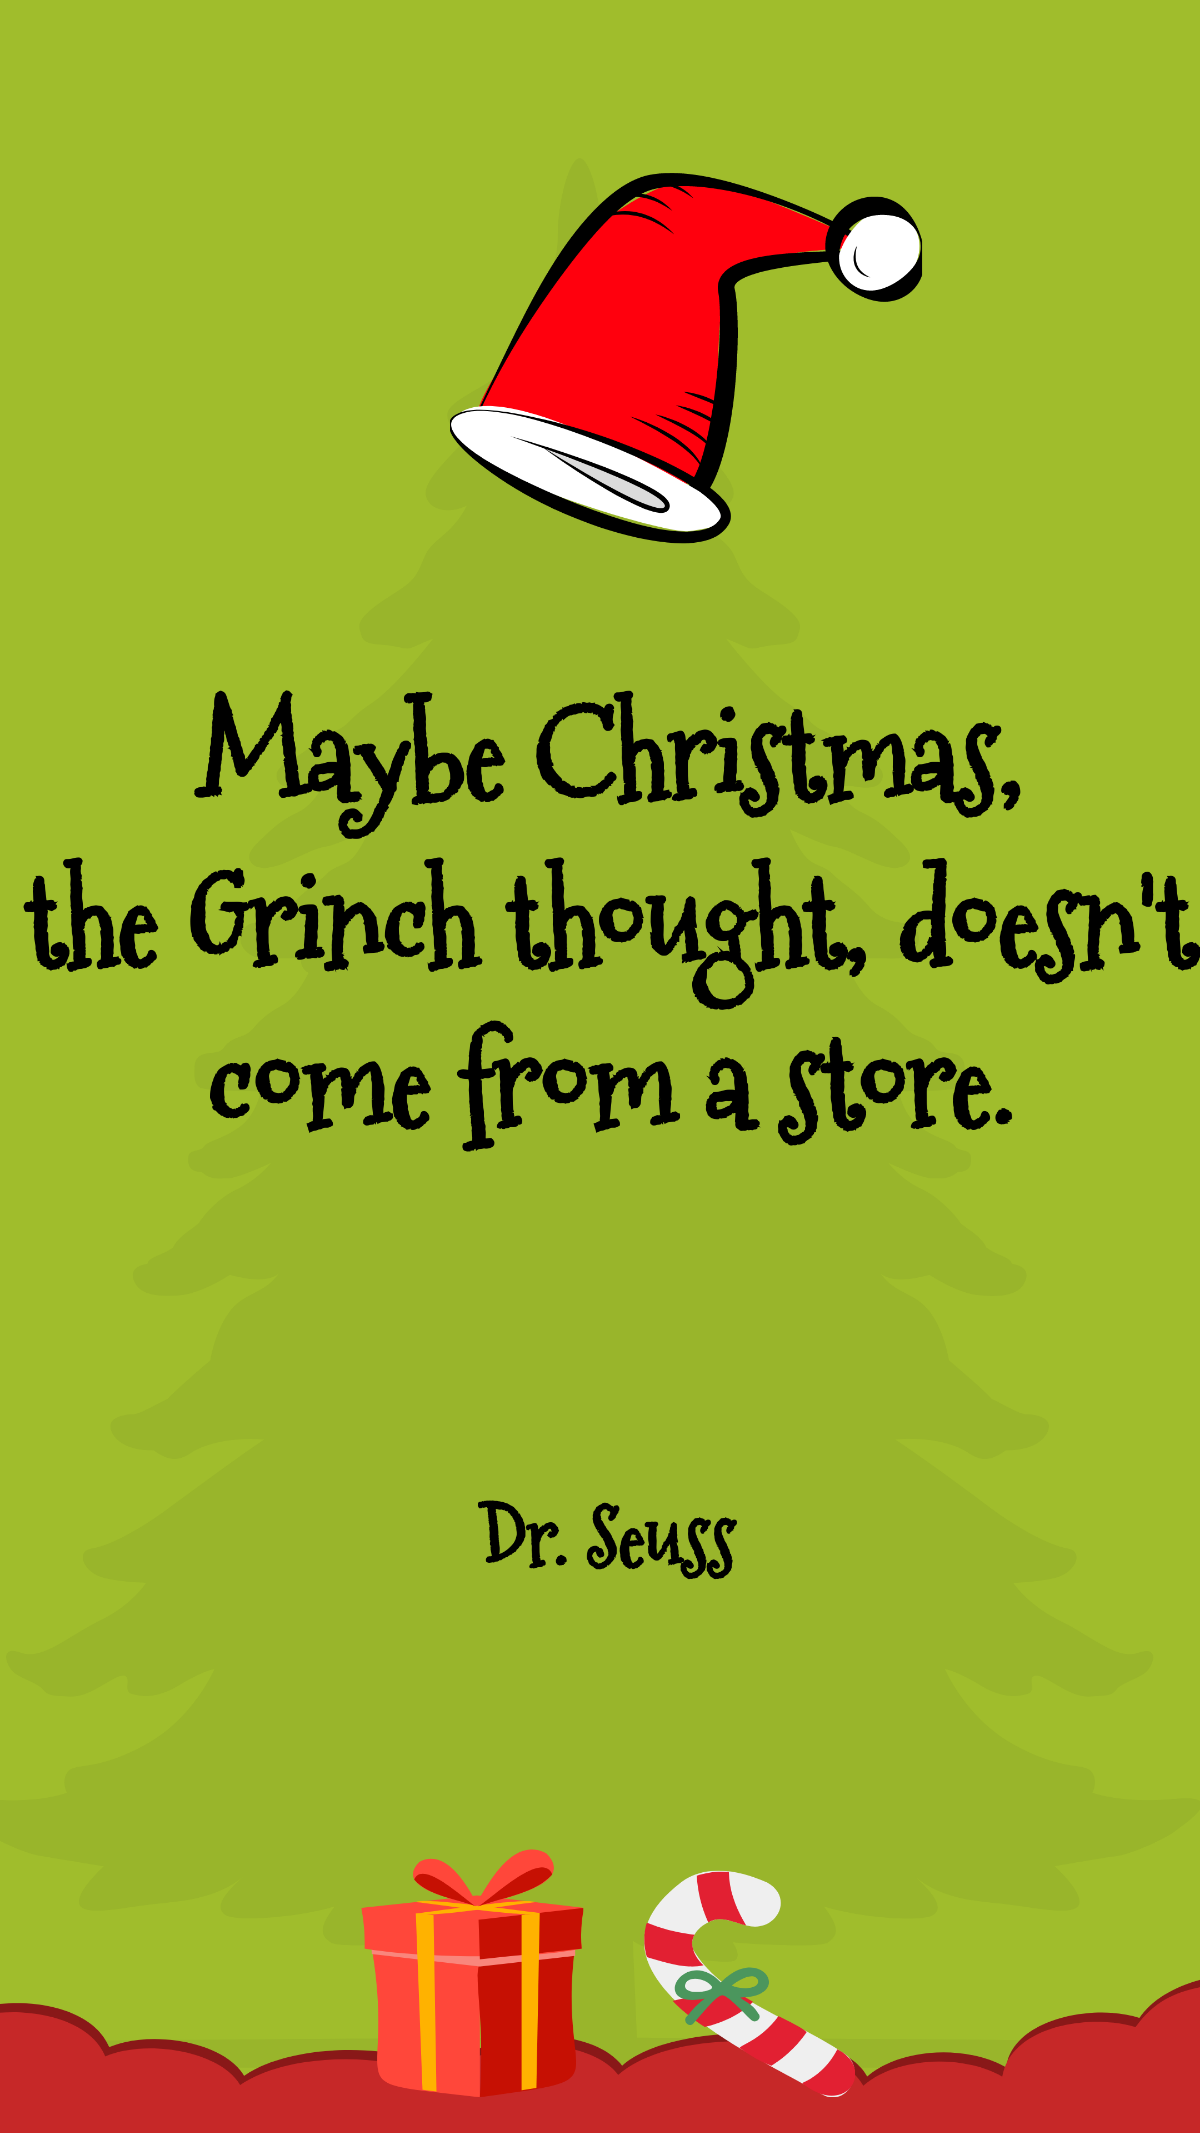 Dr. Seuss - Maybe Christmas, the Grinch thought, doesn't come from a store. Template